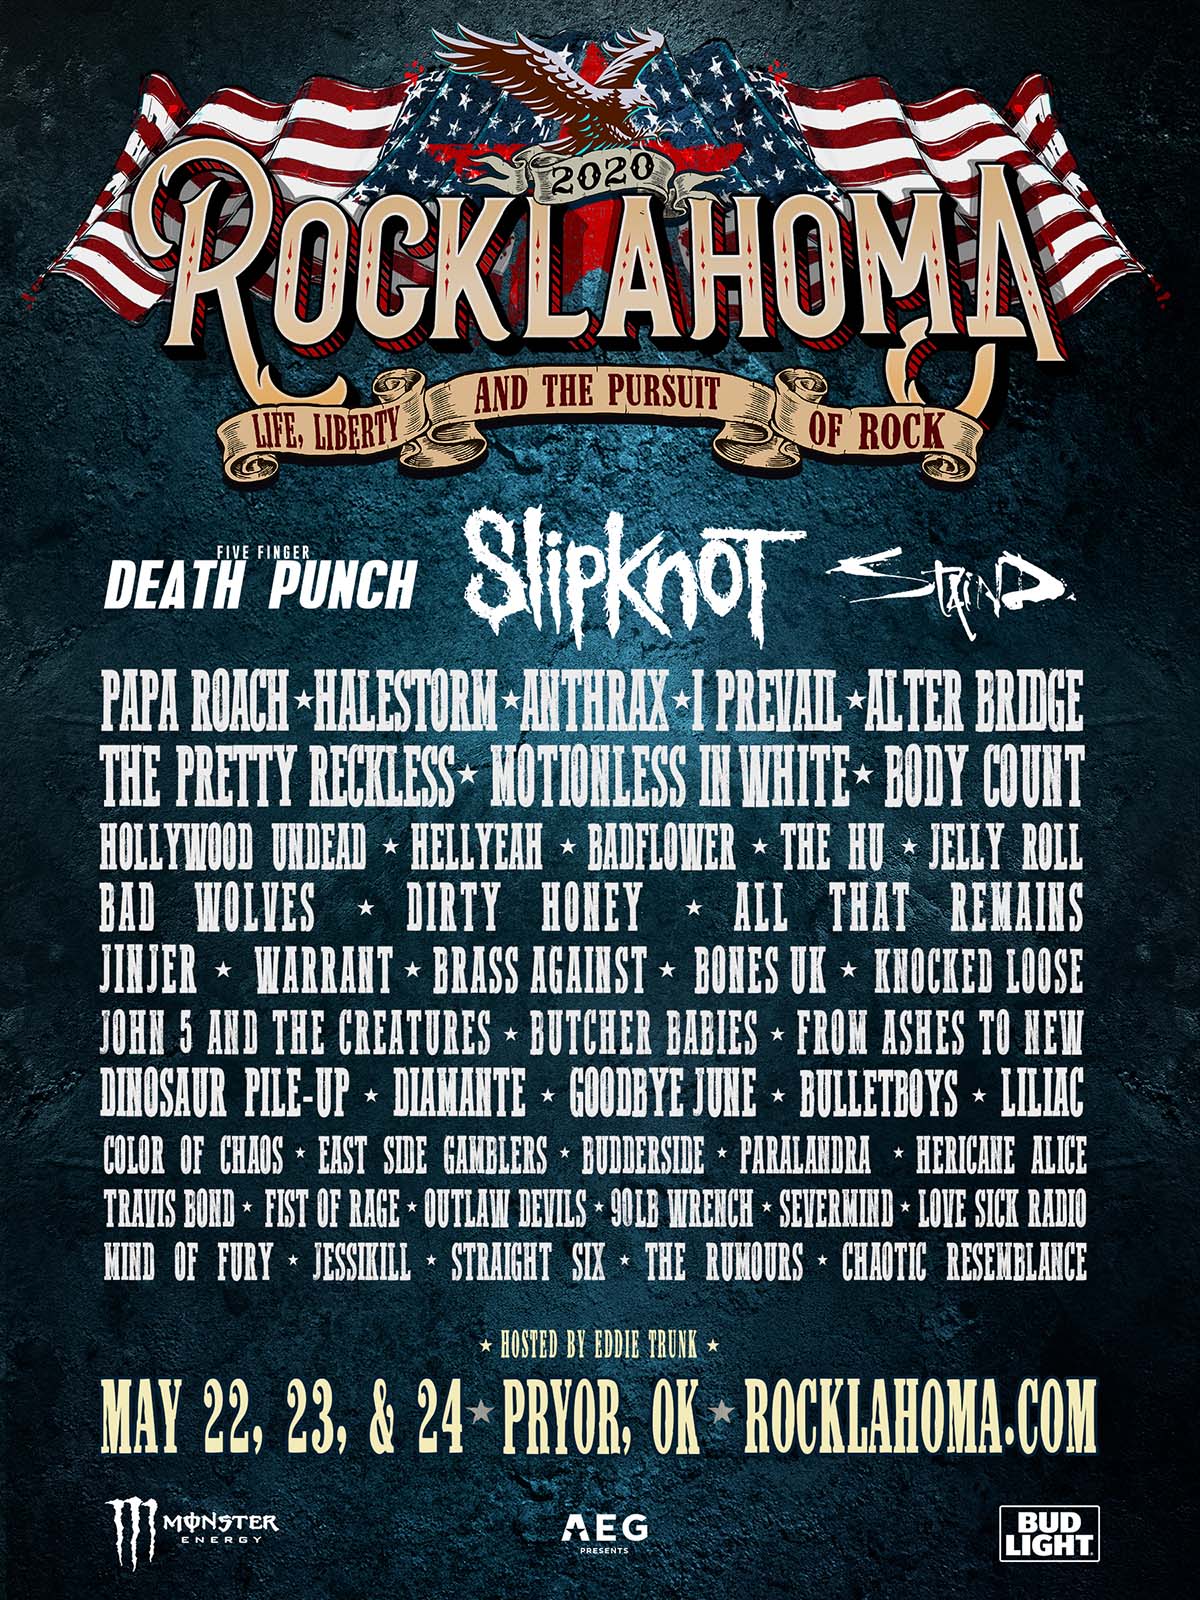 Rocklahoma 2020 Festival Lineup, Tickets and Dates